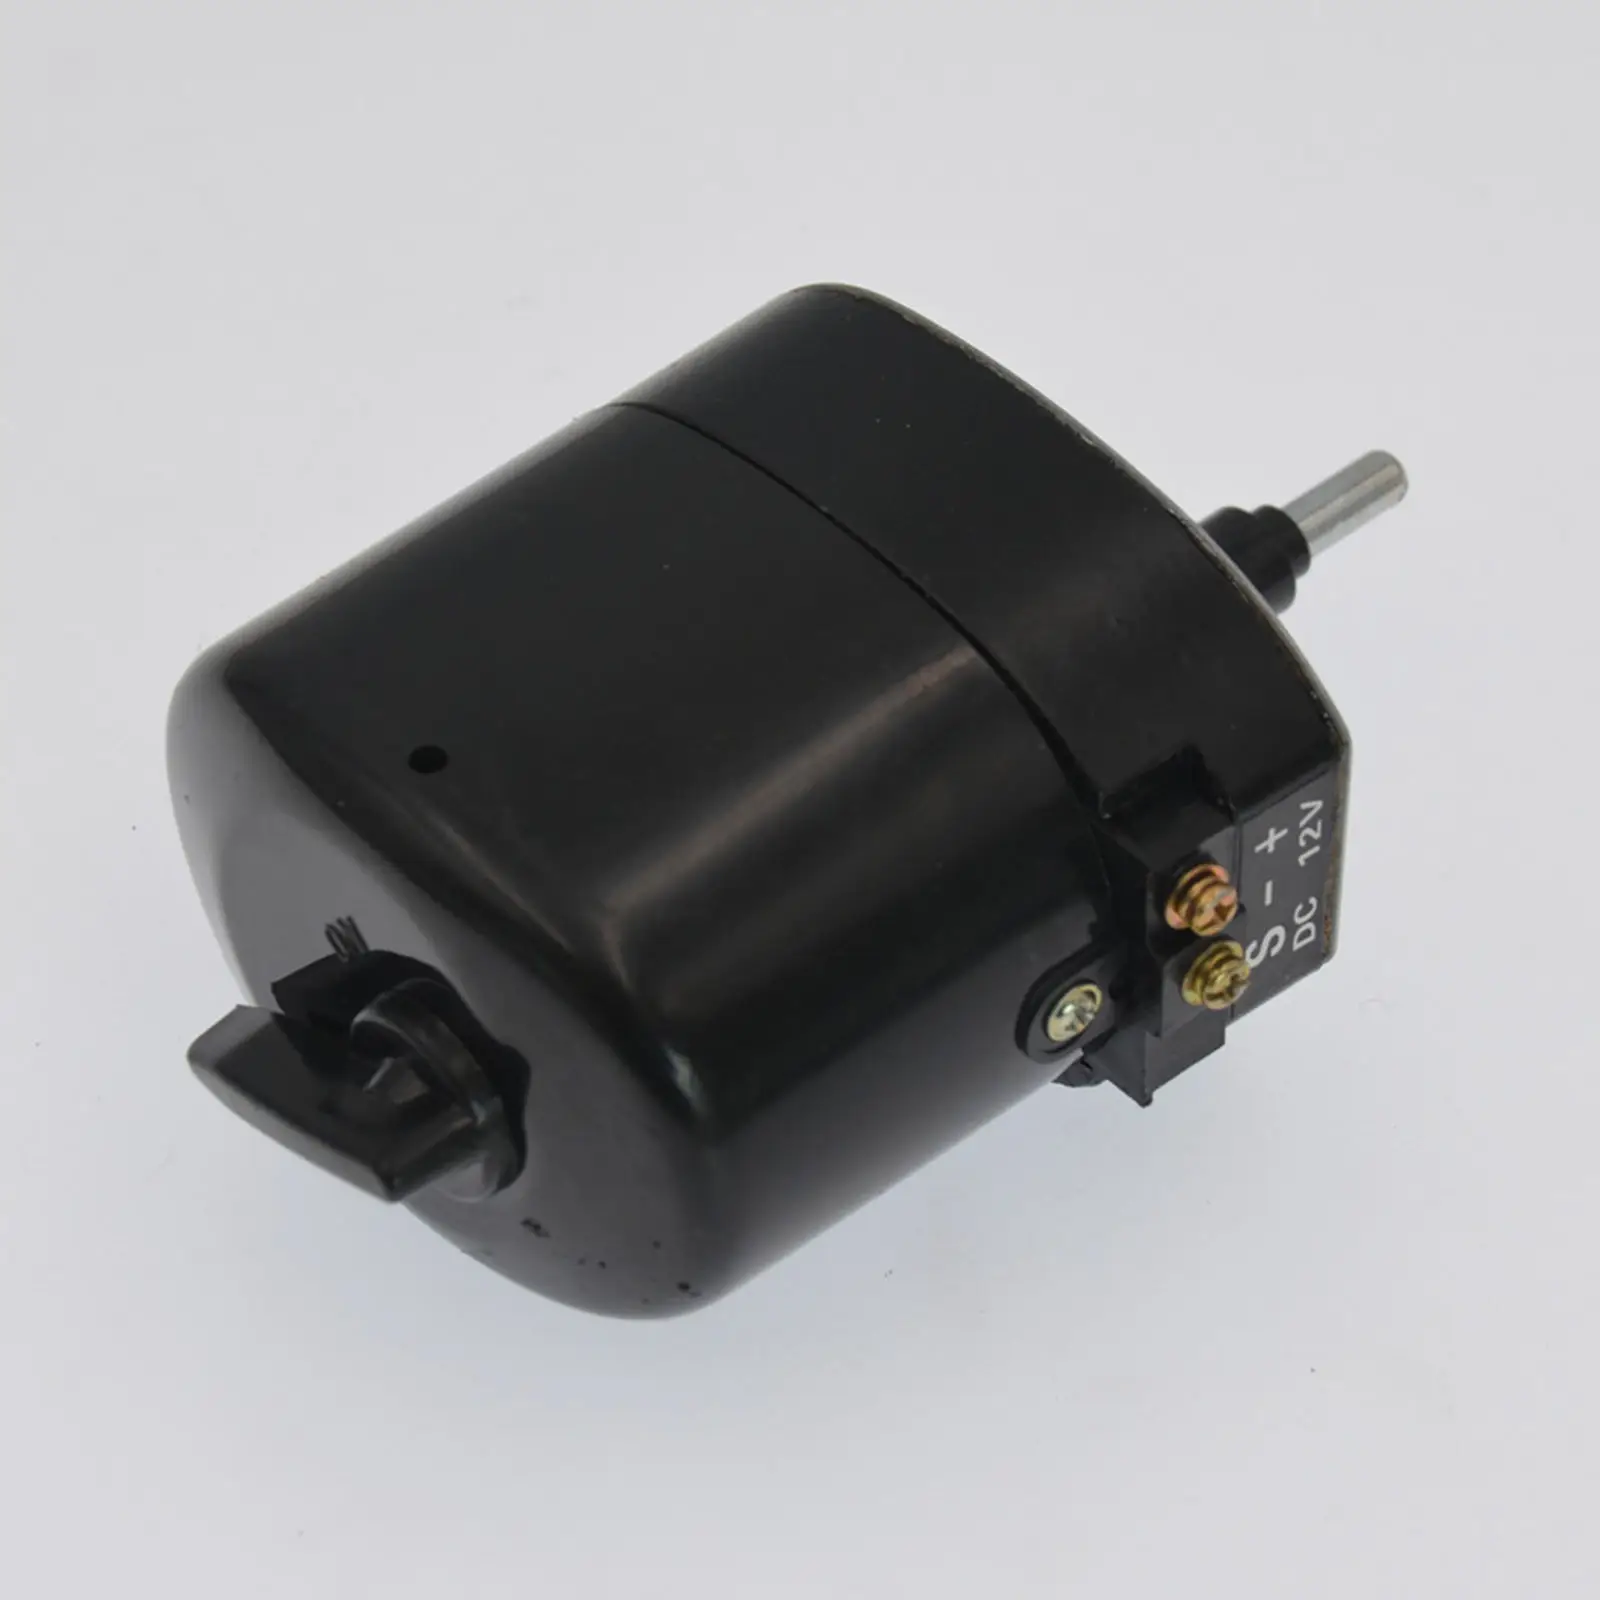 Wiper Motor Fit for Willys  Tractor 01287358 7731000001 0390506510